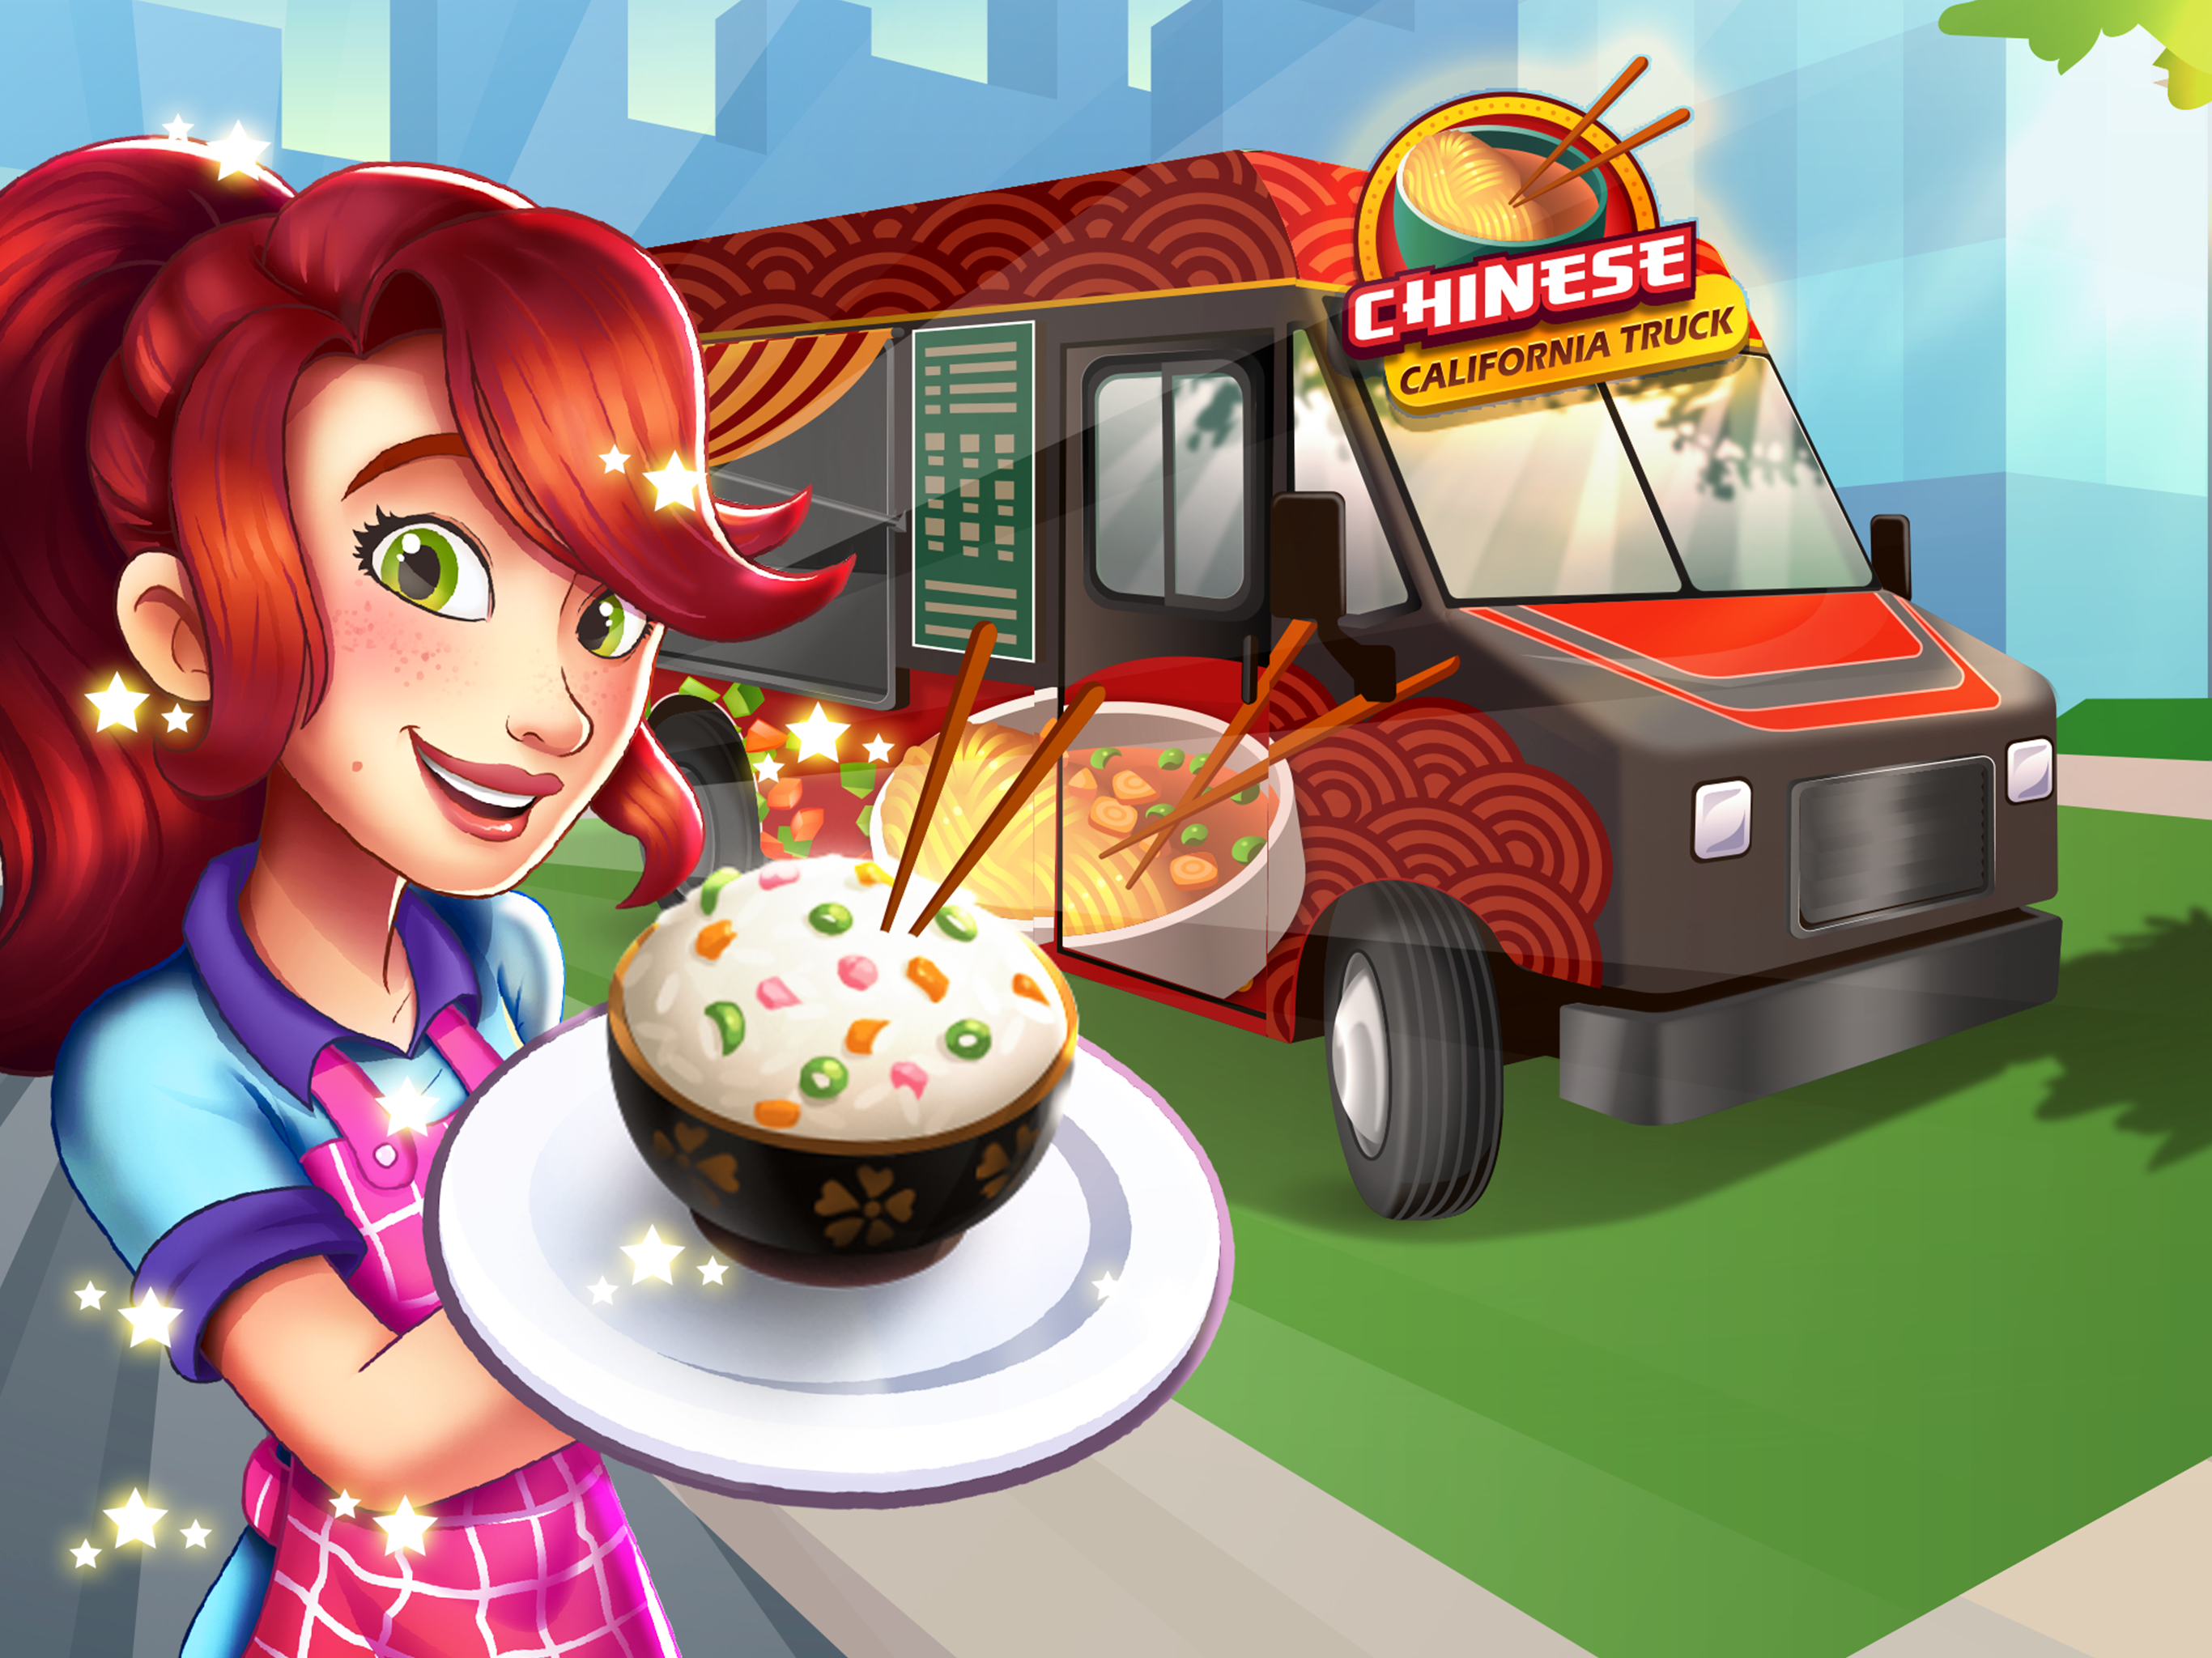 Chinese California Truck - Fast Food Cooking Gameのキャプチャ